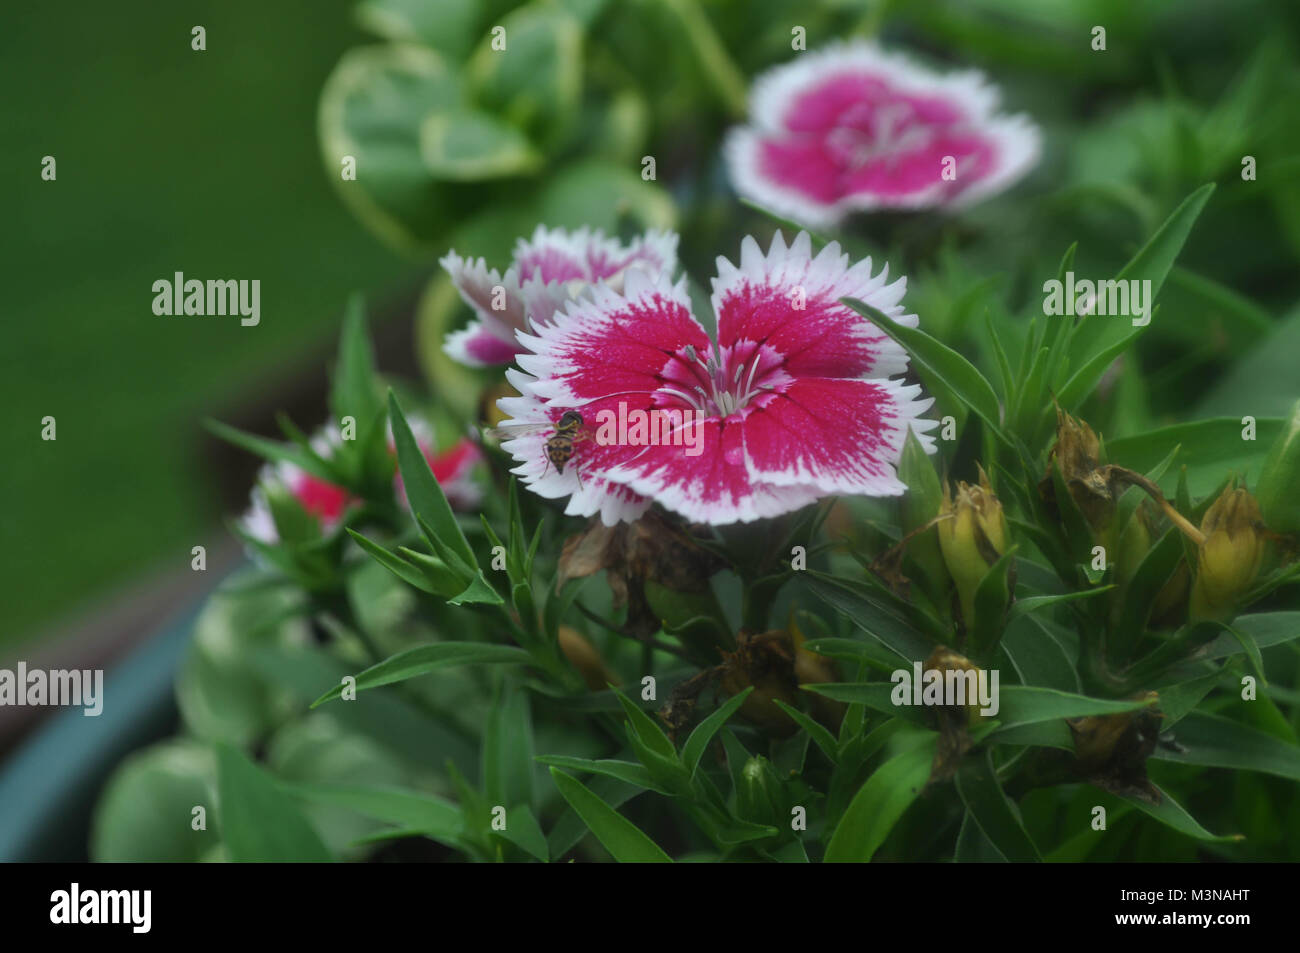 Pink and White Dianthus Flowers in Bloom Stock Photo